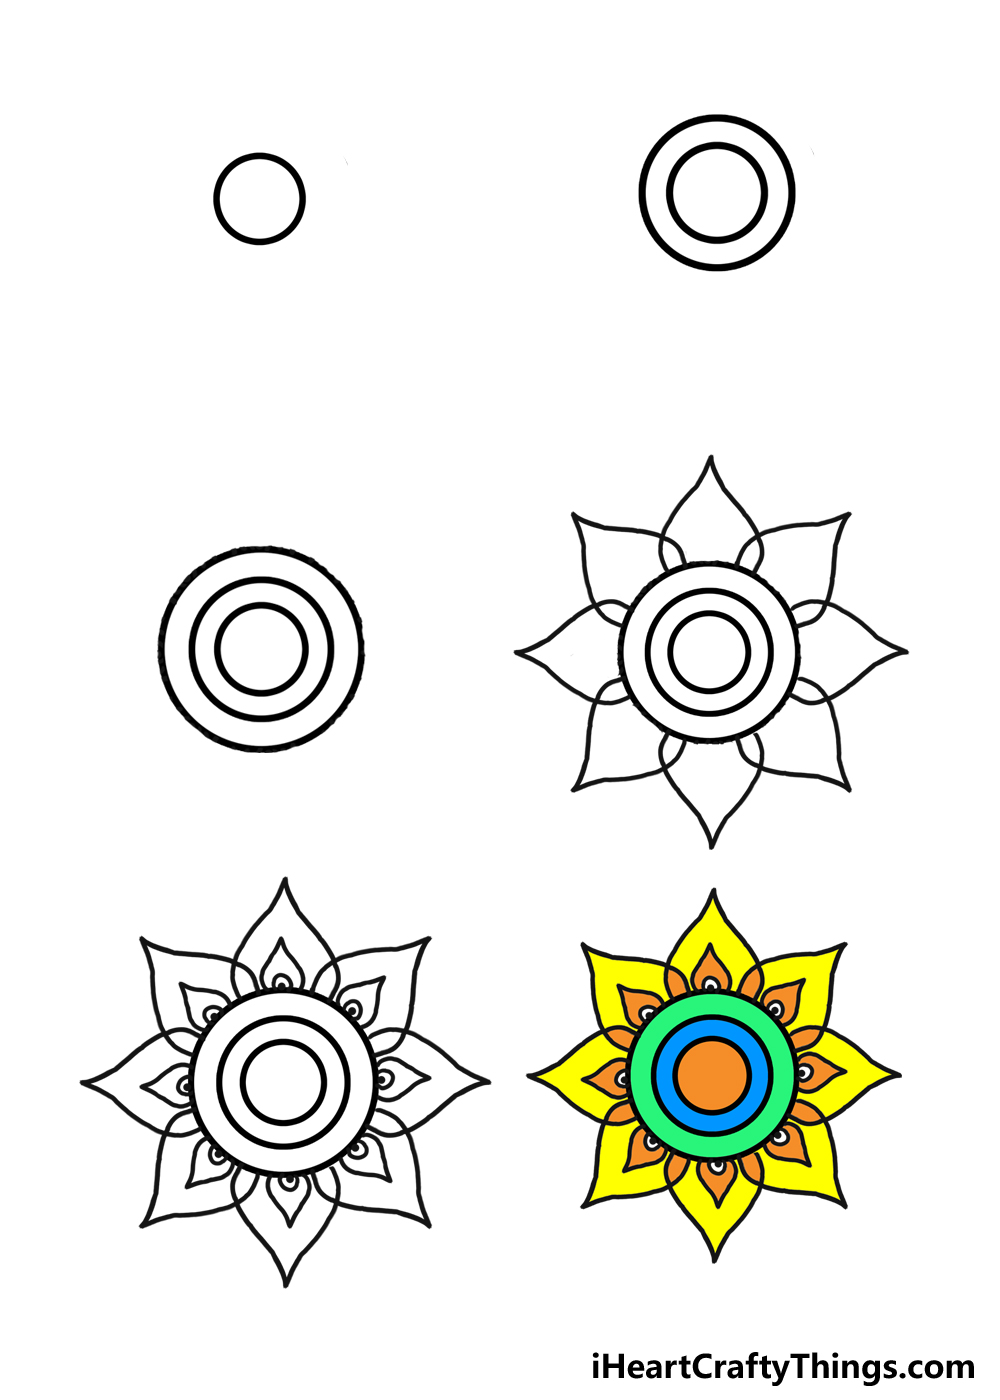 How to Draw A Simple Mandala